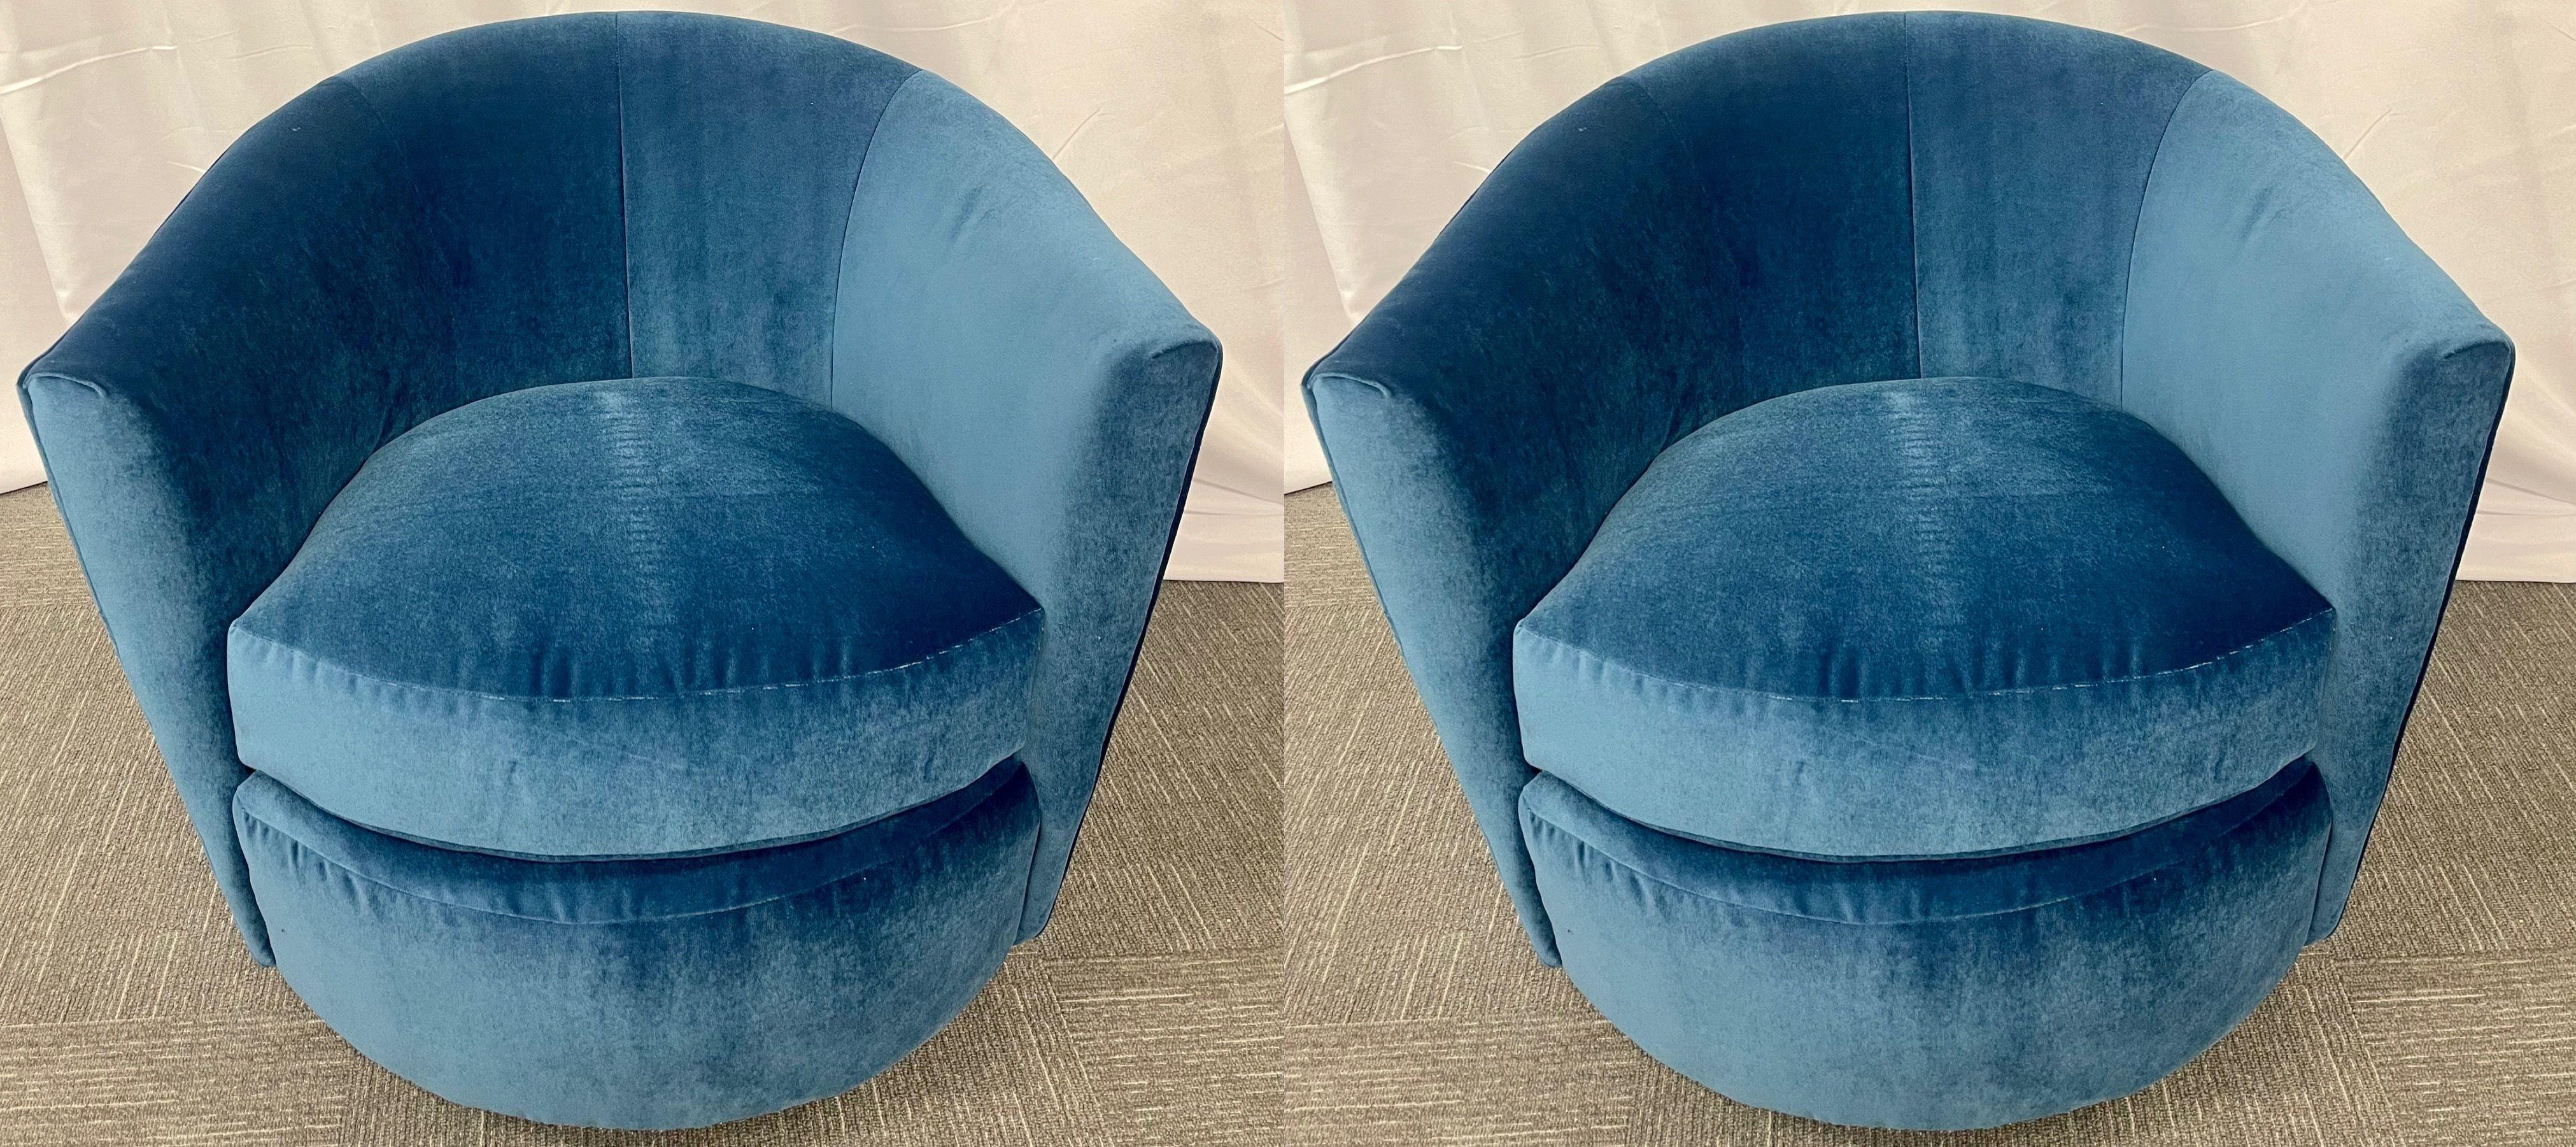 Pair of Milo Baughman style swivel, tub chairs, blue velvet, American, 1980s.

These stylish tub, swivel or arm chairs reminiscent of the Kagan style and design each have a Blue Velvet fabric accompanied by matching cushions and steel swivel